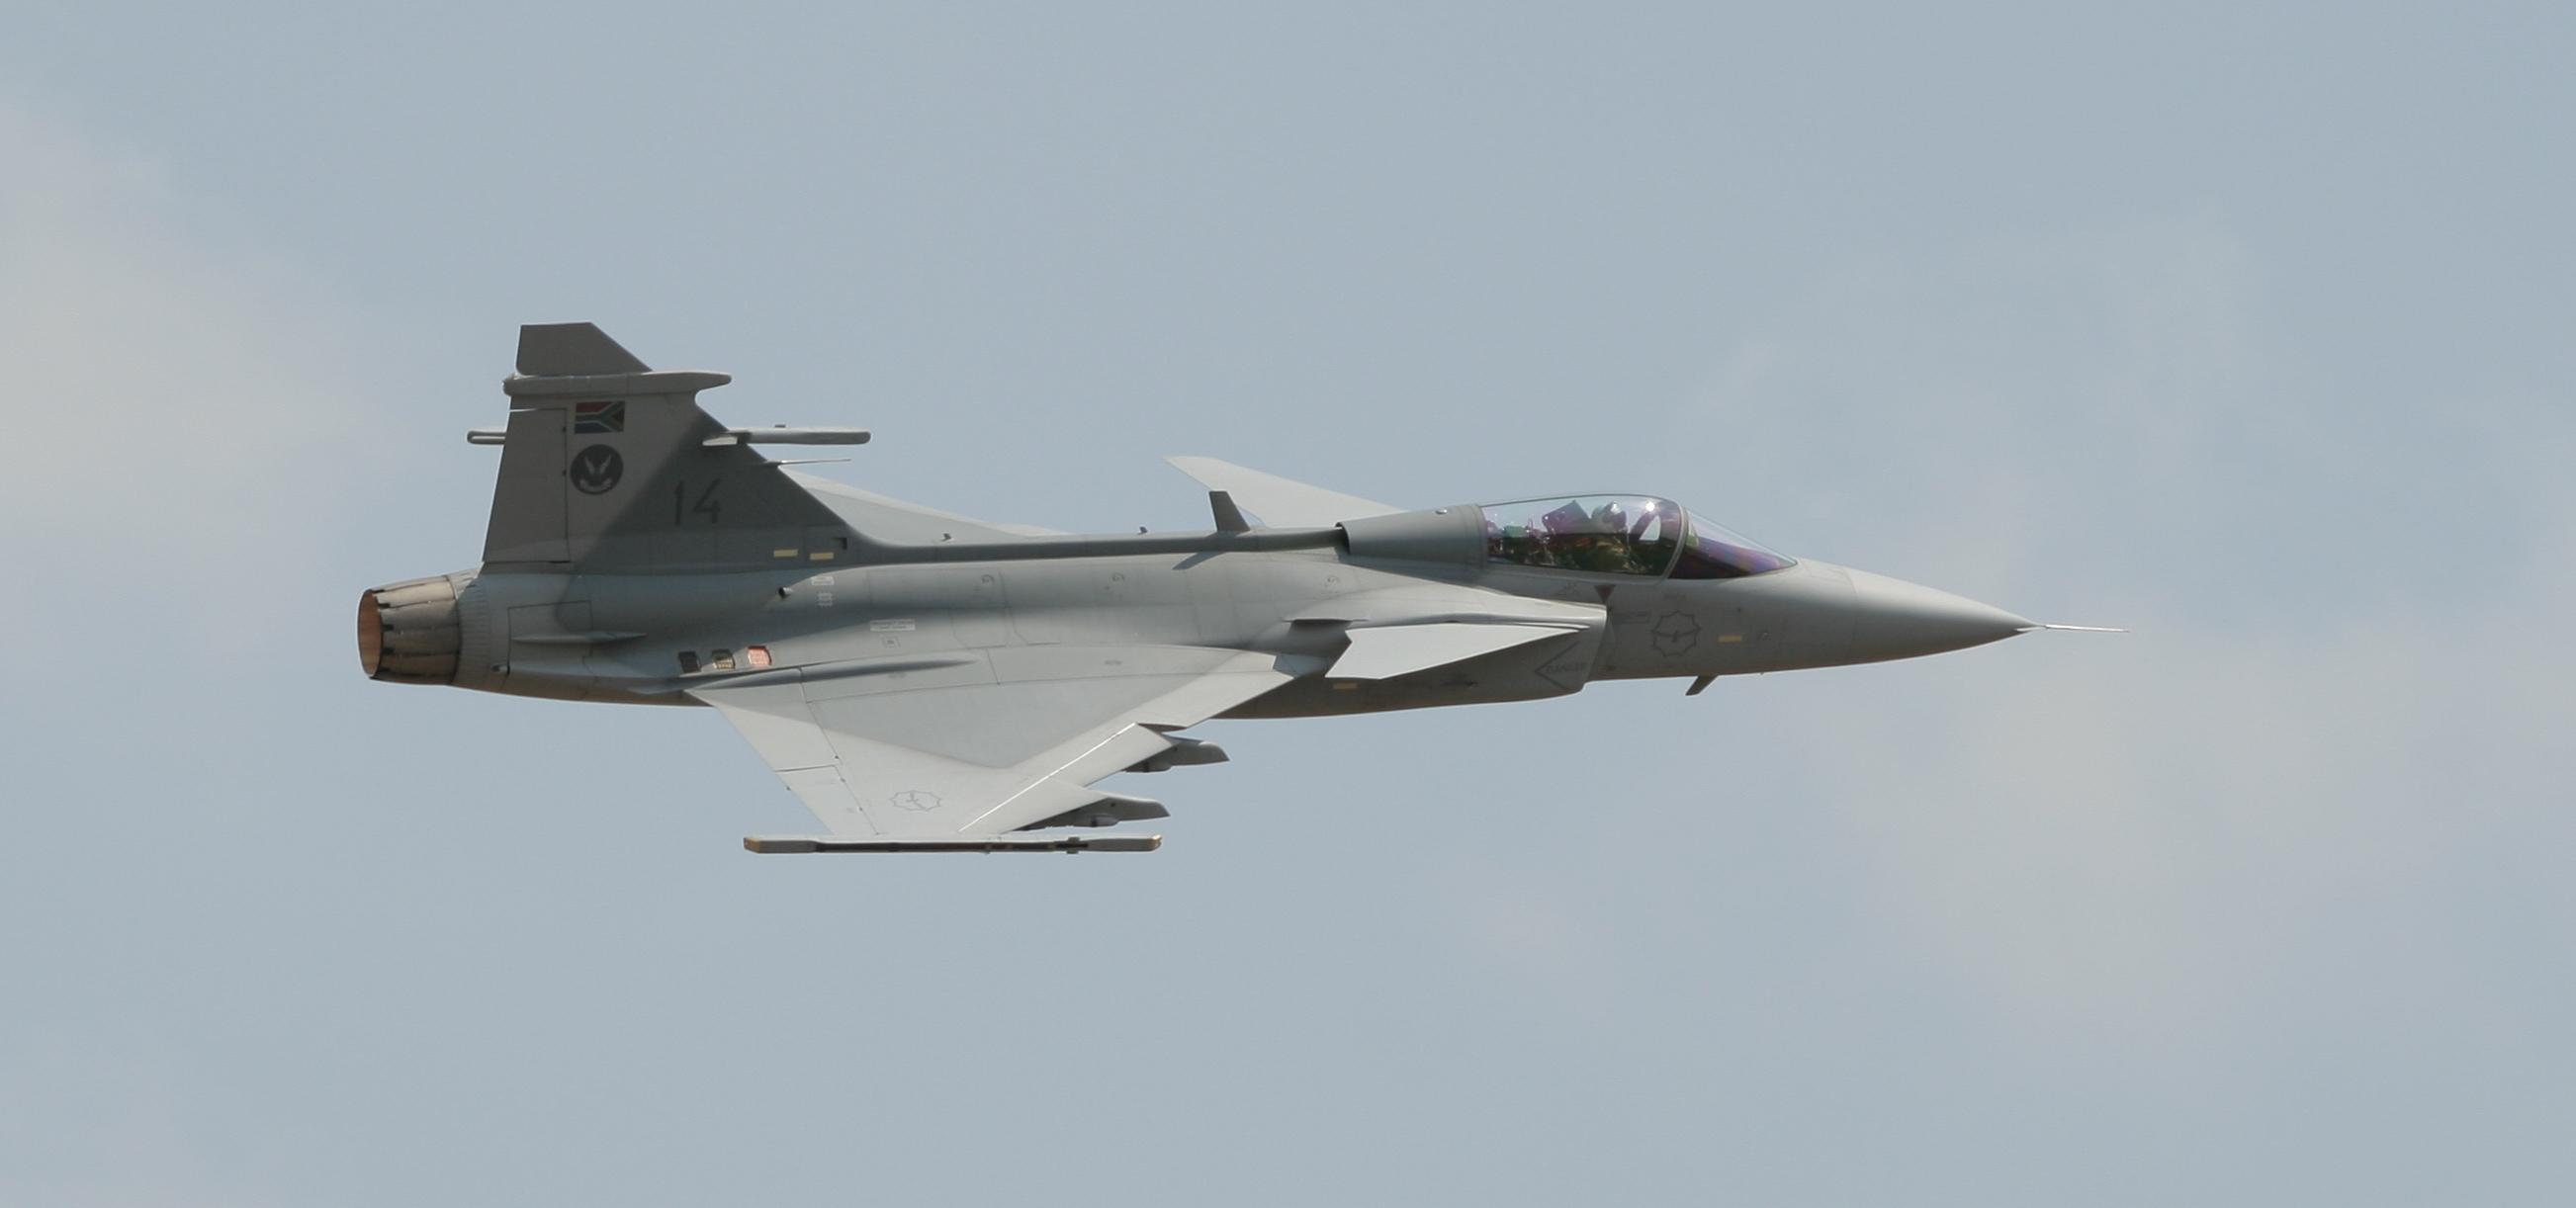 Hungary’s Gripens Alerted Mostly To Russian Violations Of Baltic Airspace